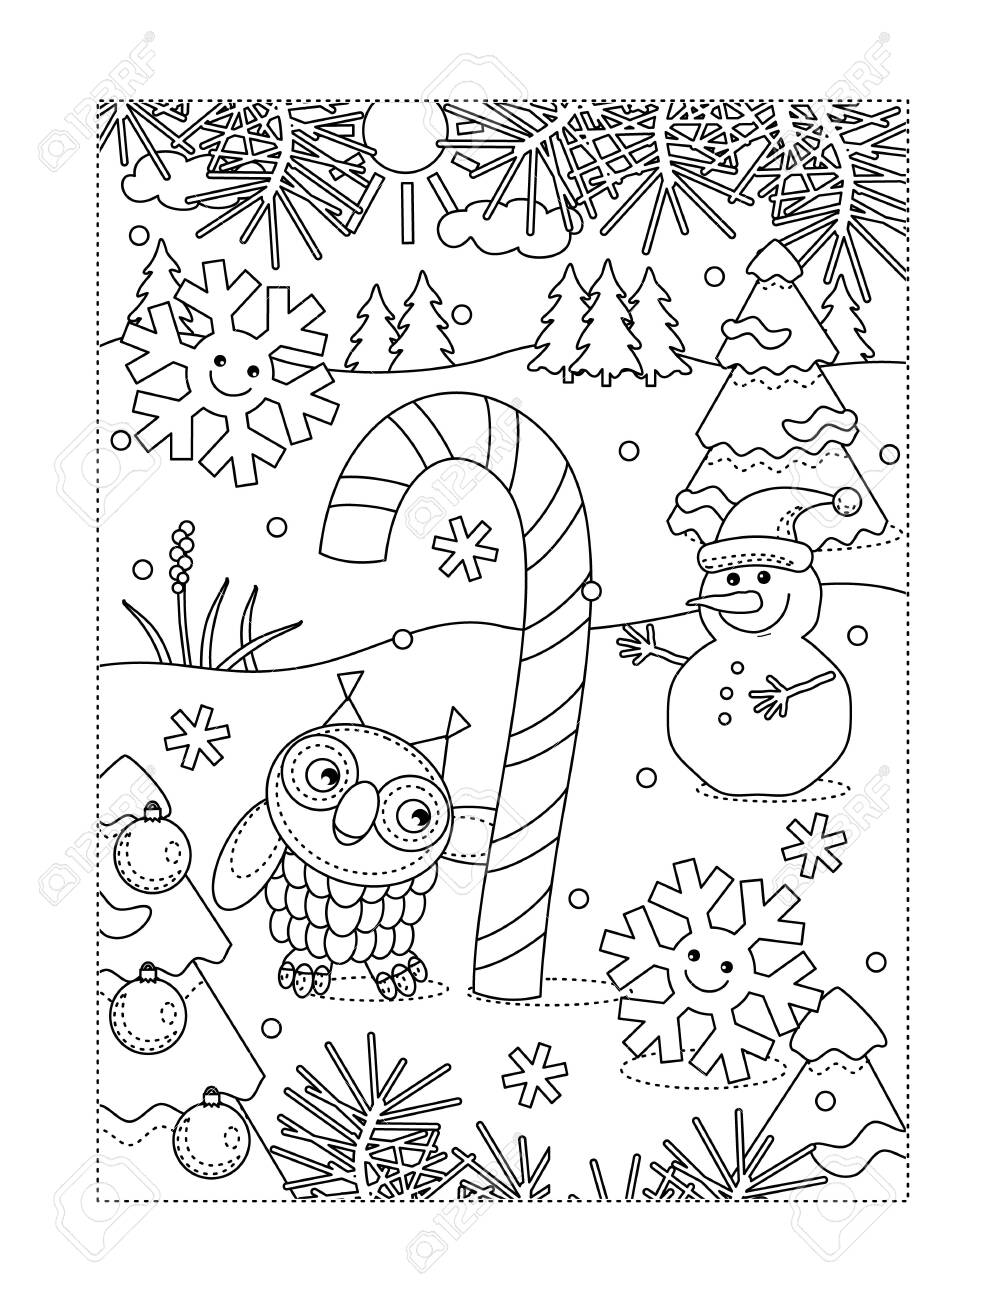 Winter holidays joy themed coloring page with big magic candy cane owl snowman two cheerful snowflakes outdoor scene royalty free svg cliparts vectors and stock illustration image